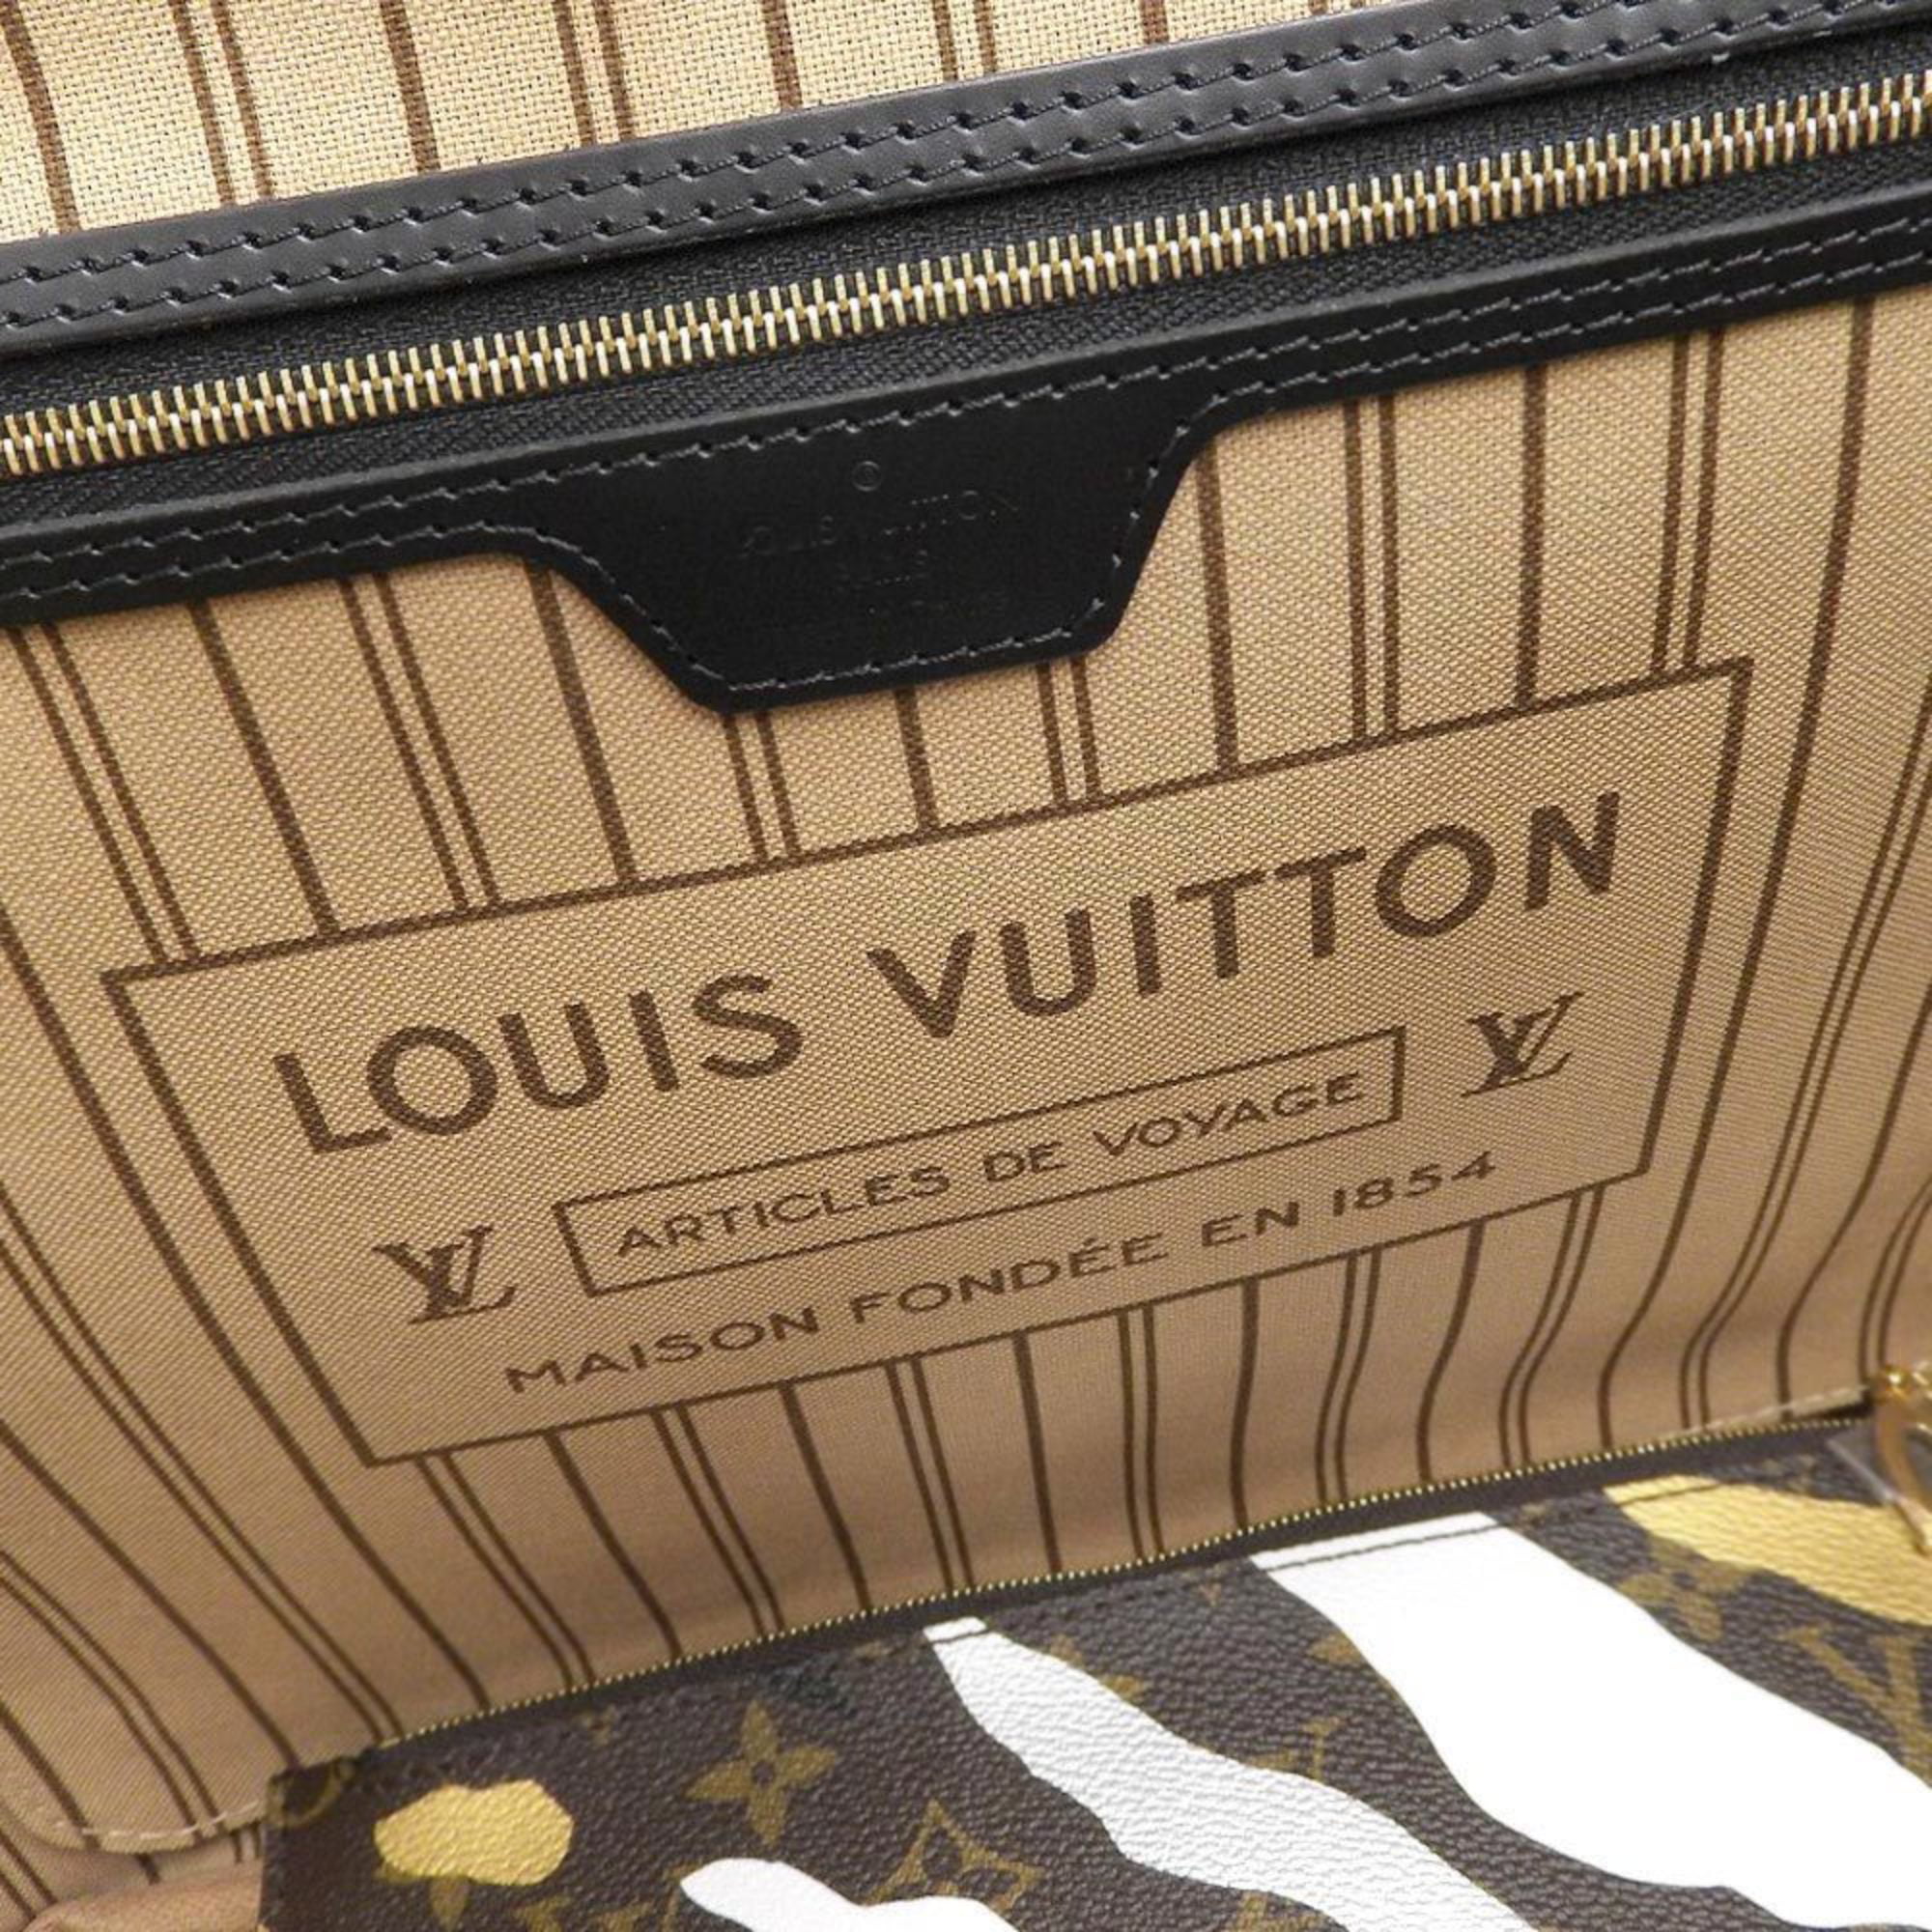 Authenticated Used Louis Vuitton LOUIS VUITTON Monogram Camouflage  Neverfull MM Tote Bag LOL Collaboration Limited M45201